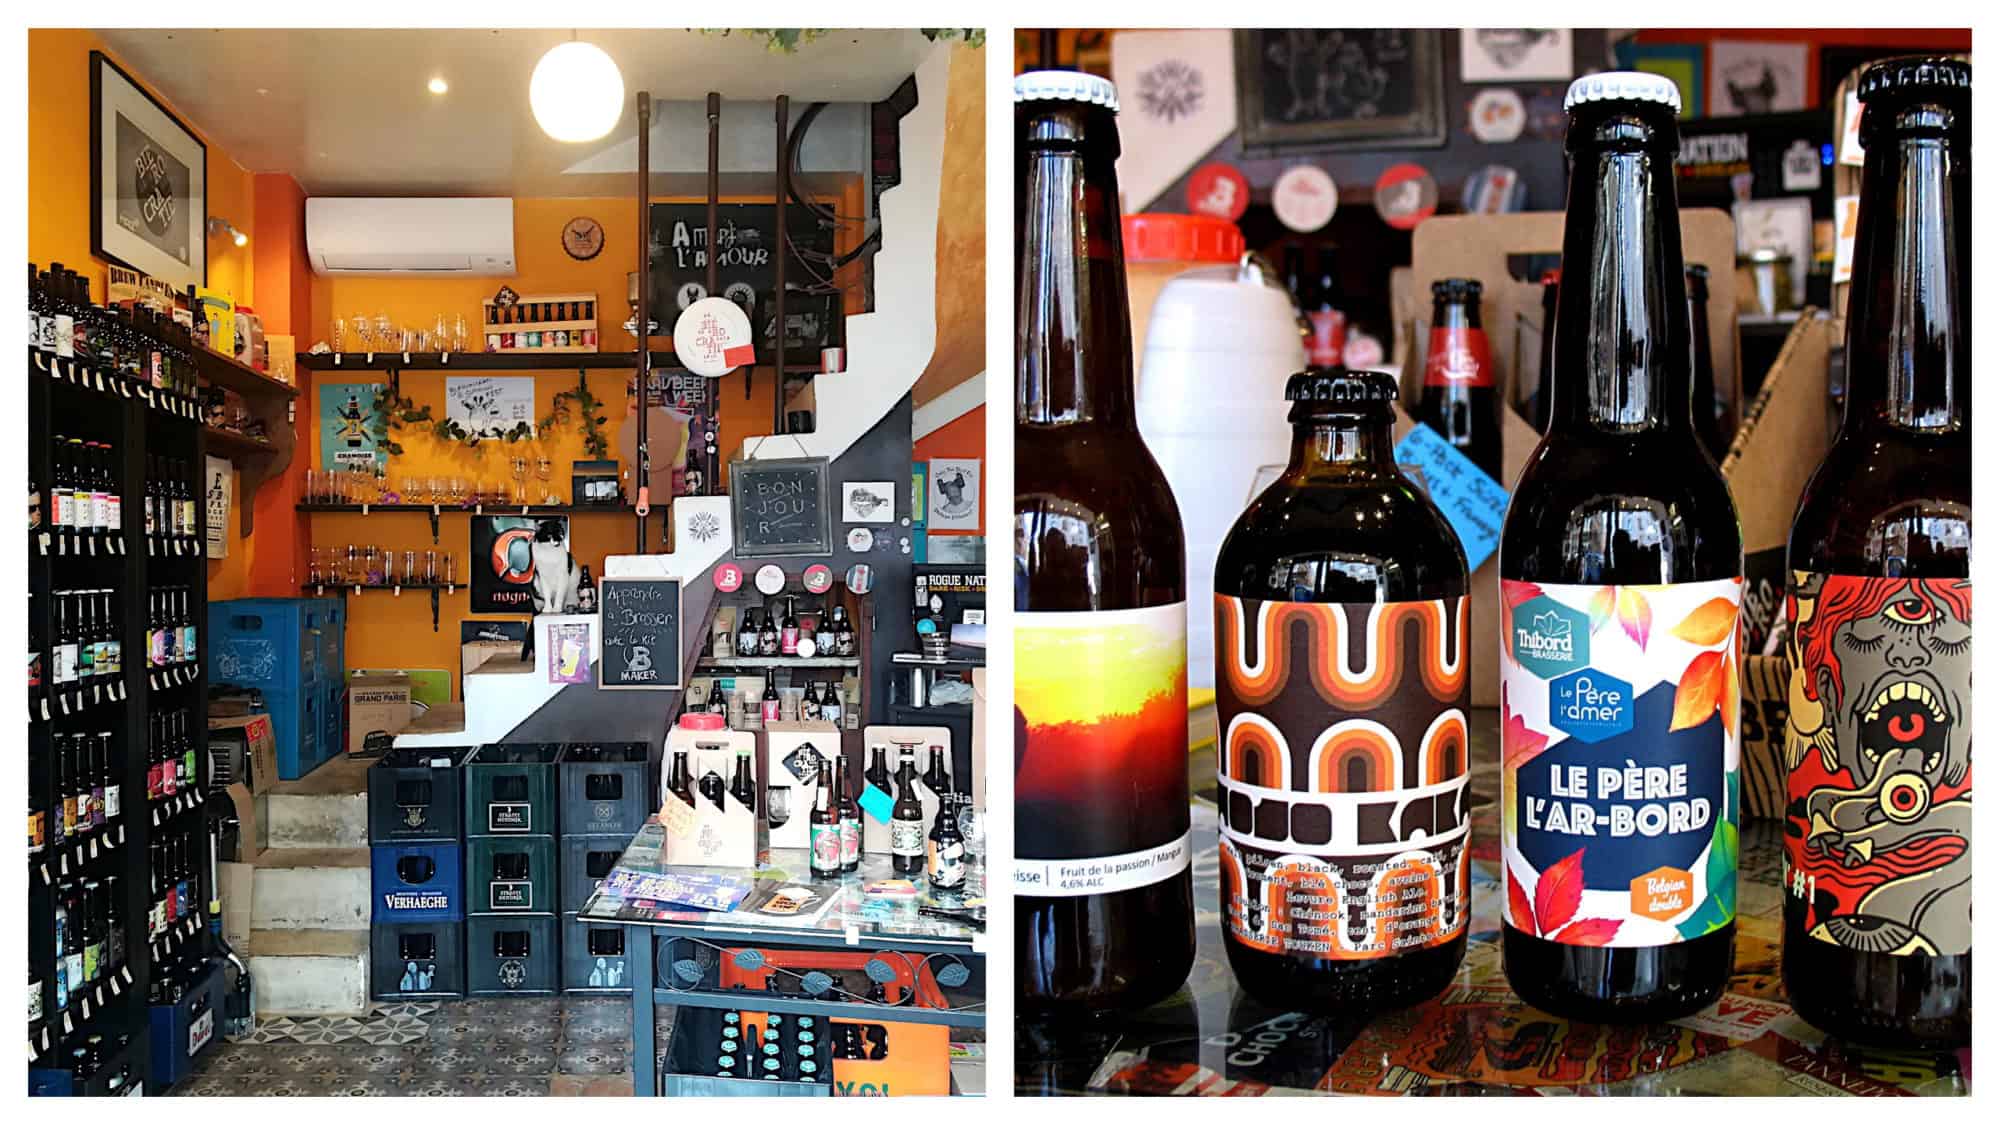 Inside craft beer shop in Paris Biérocratie (left) and a selection of four craft beer bottles (right).